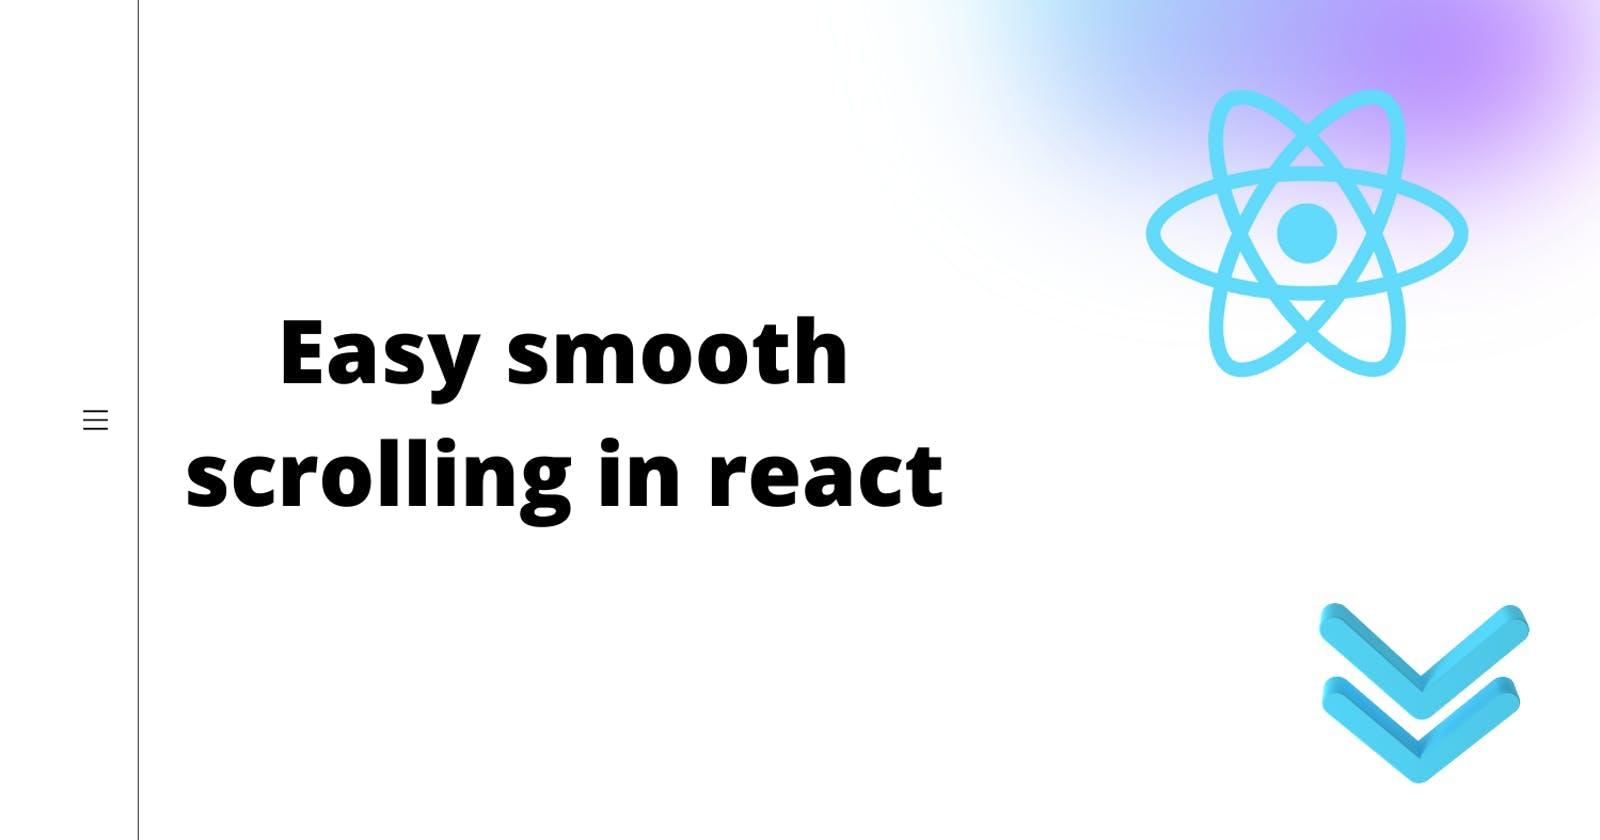 Easy smooth scrolling in react